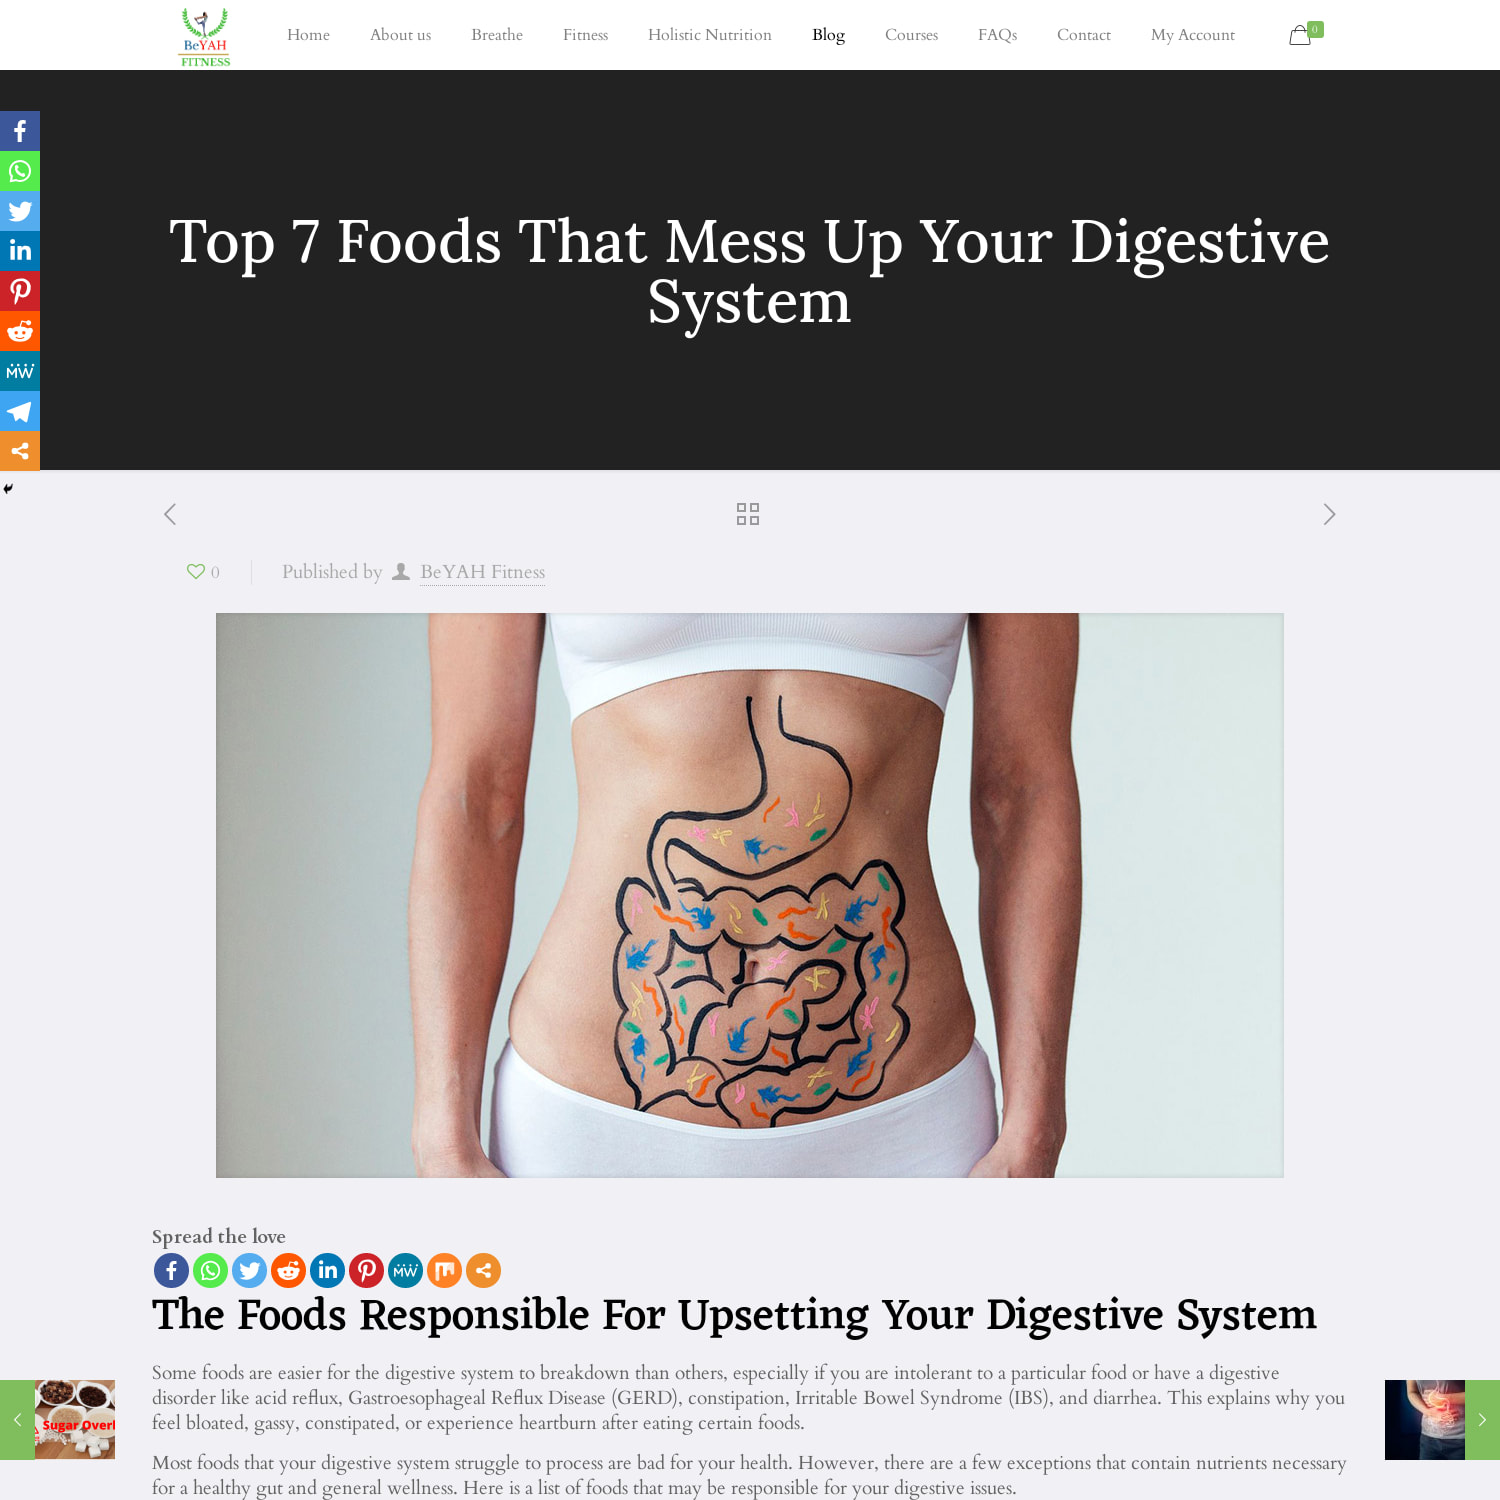 Top 7 Foods That Mess Up Your Digestive System